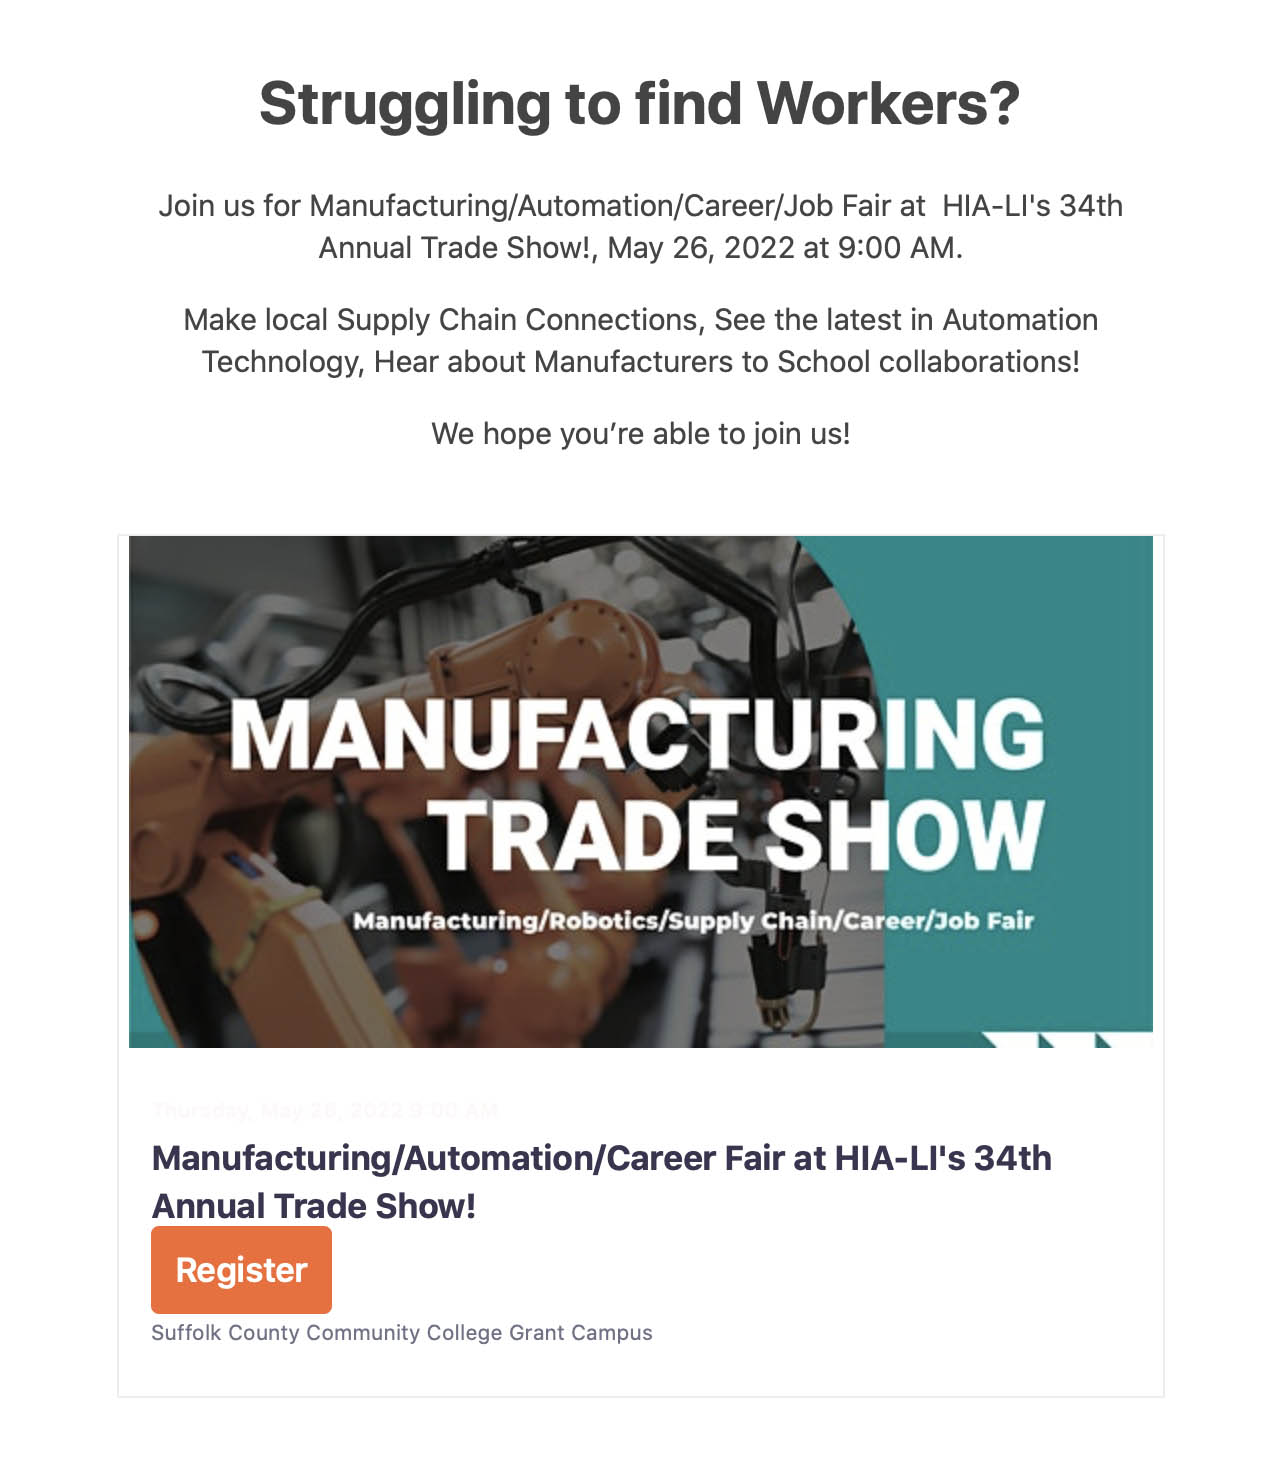 Manufacturing Trade Show